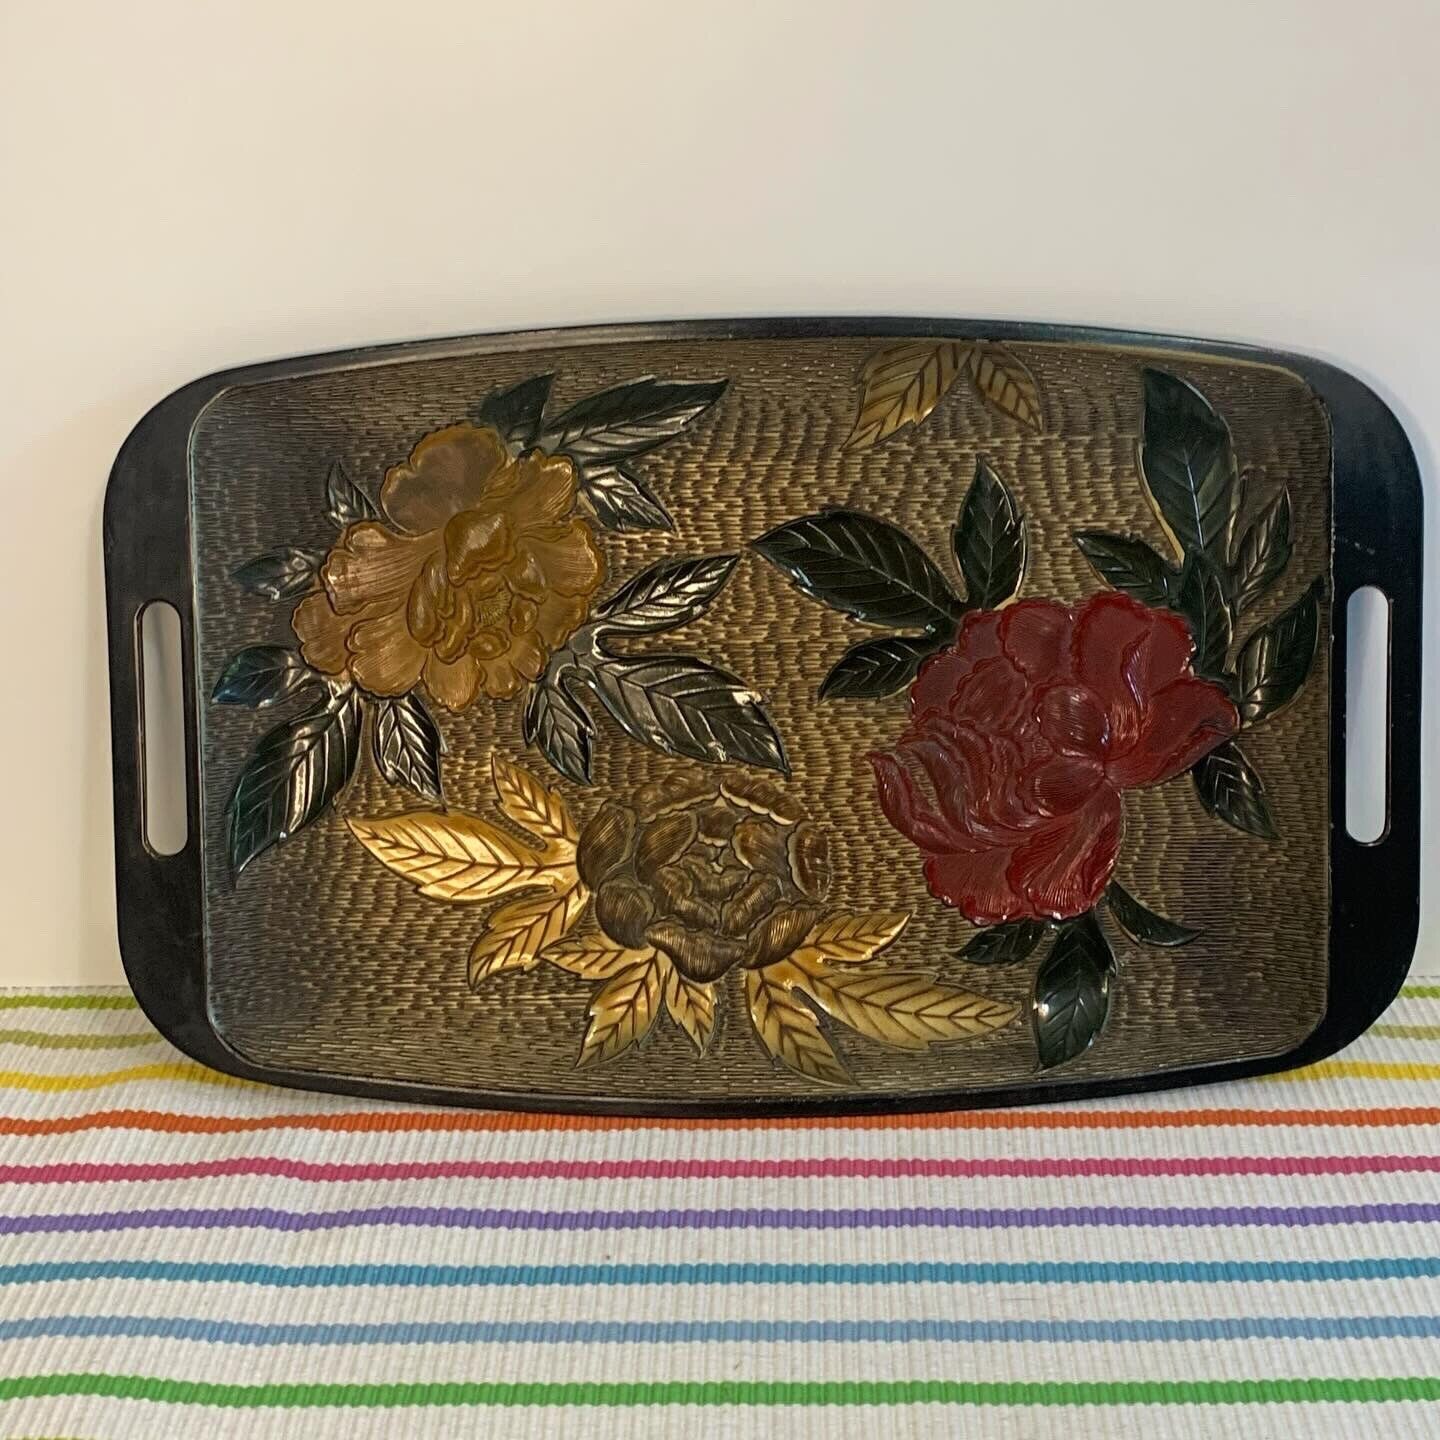 Vintage Lacquerware Serving Tray With Roses